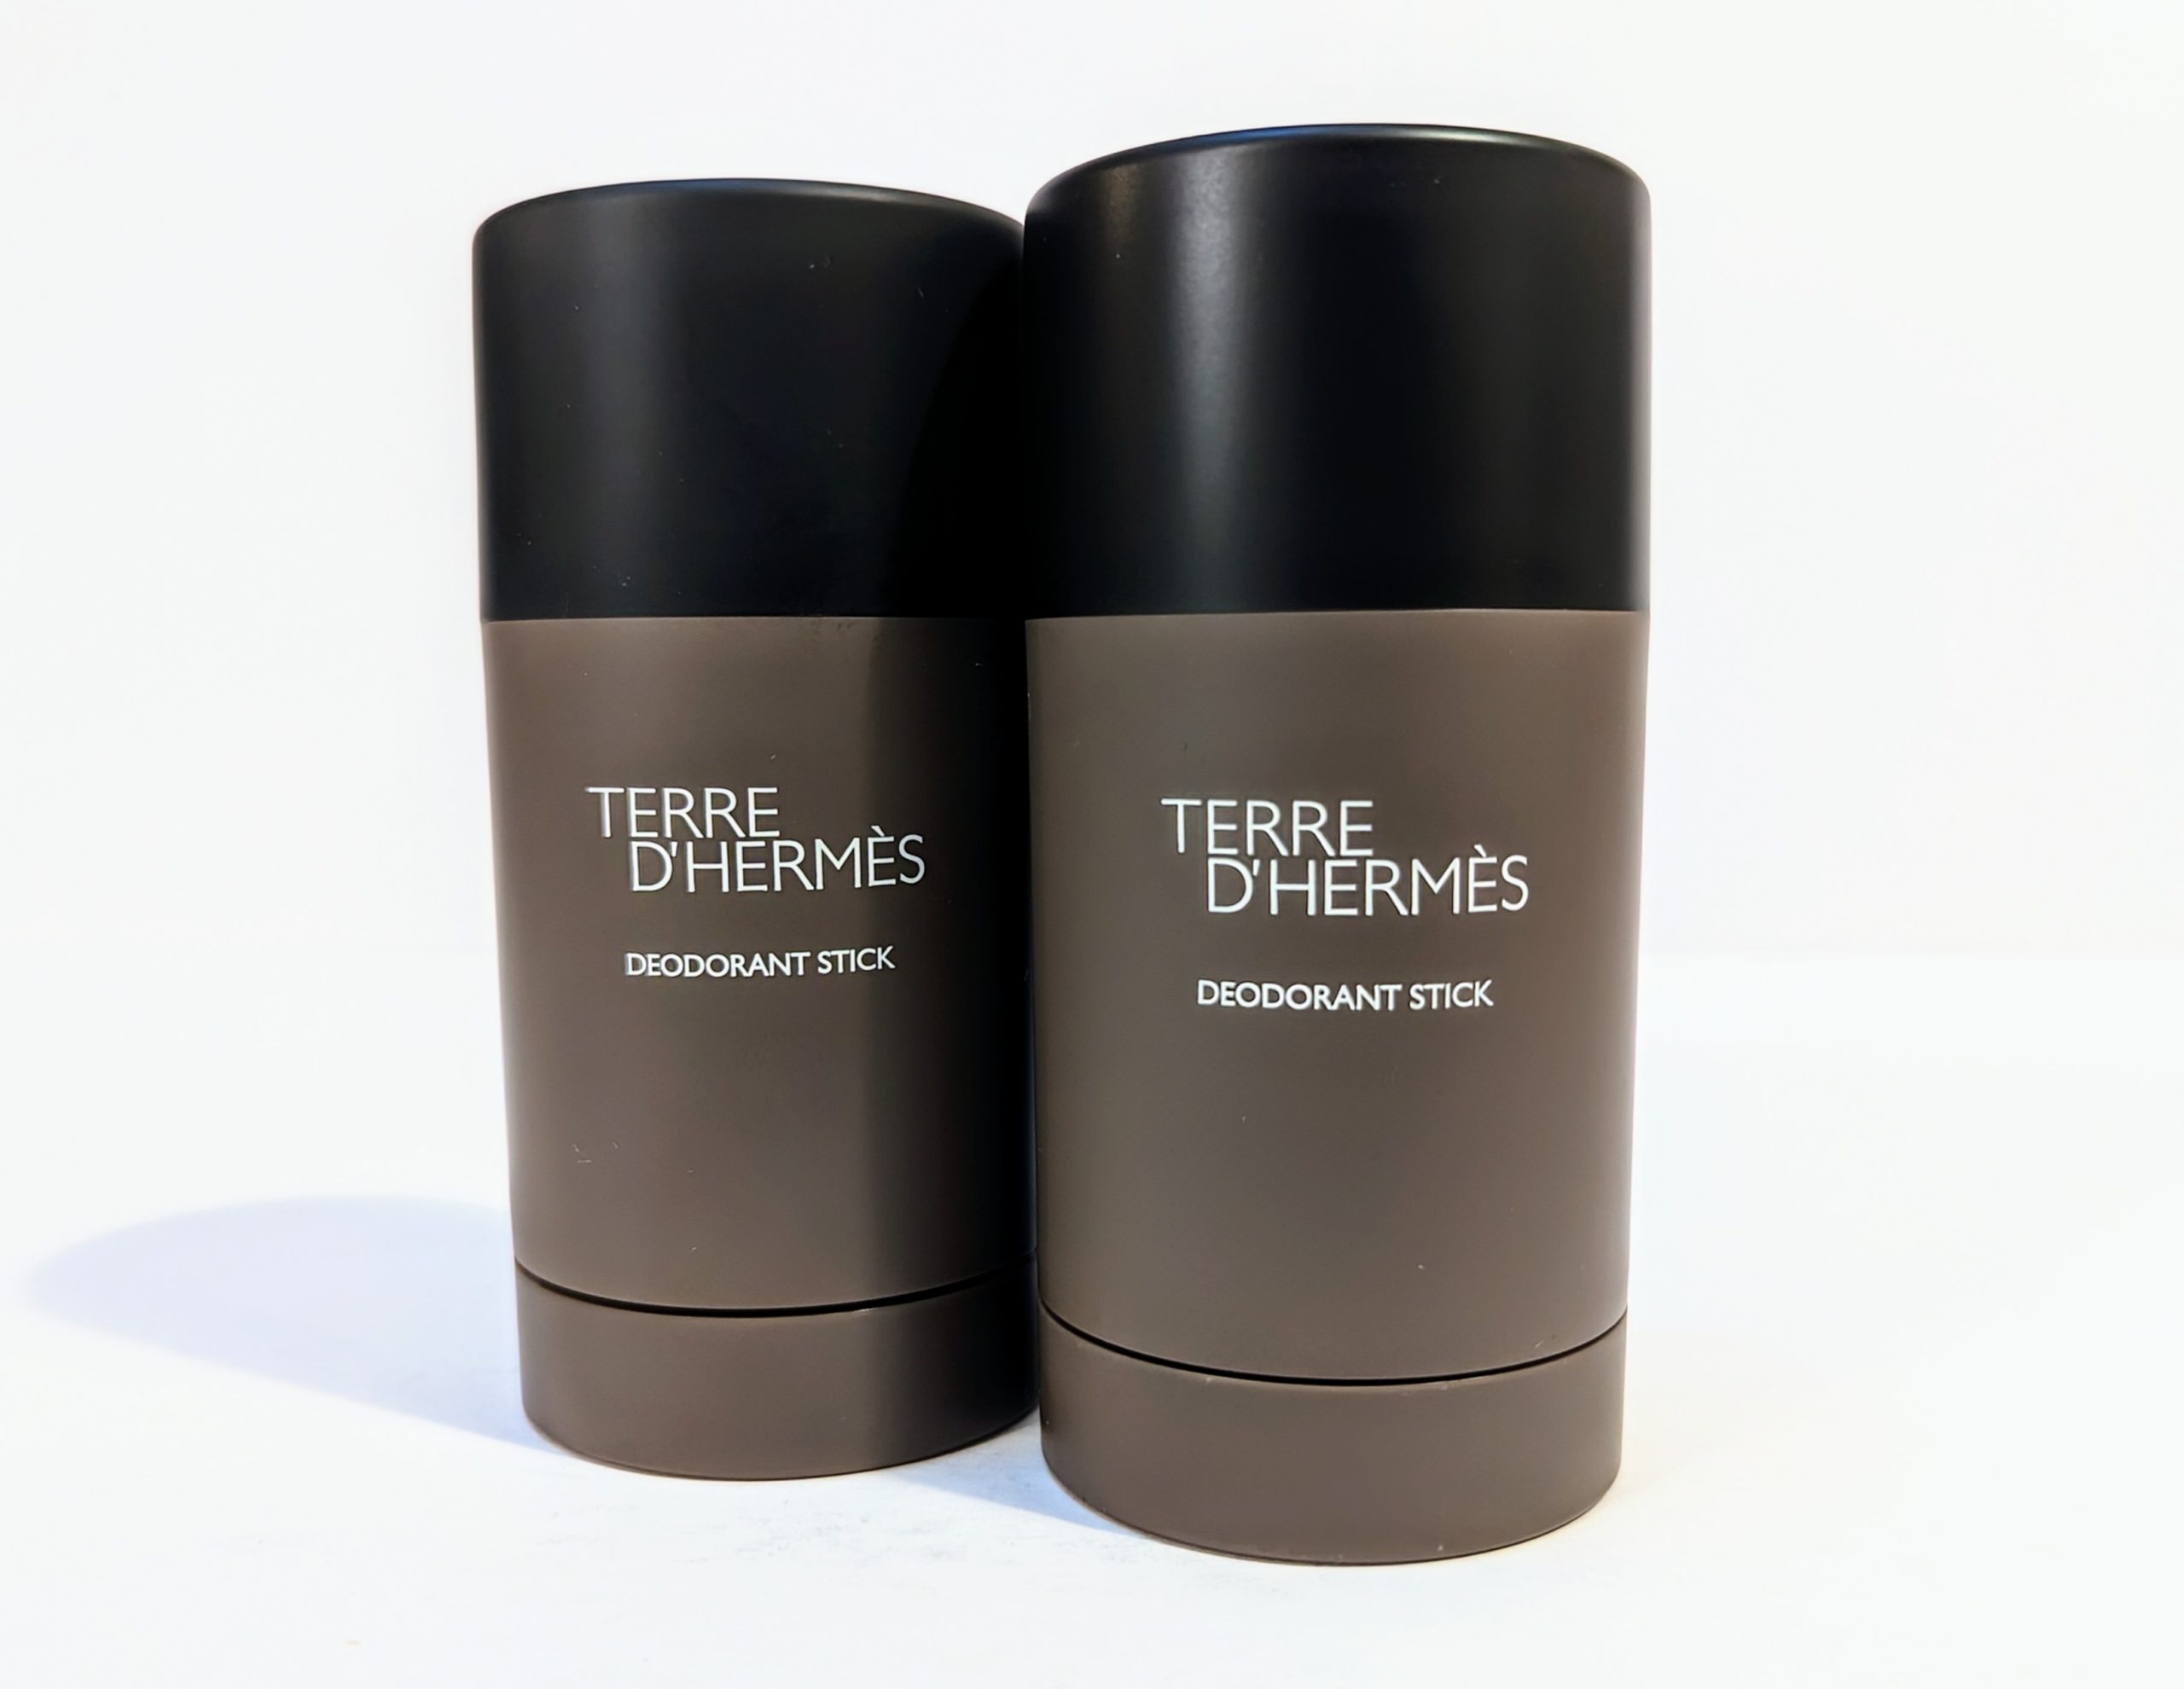 Two bottles of Terre d’Hermès deodorant sticks with brown containers and black caps stand side by side on a white background.